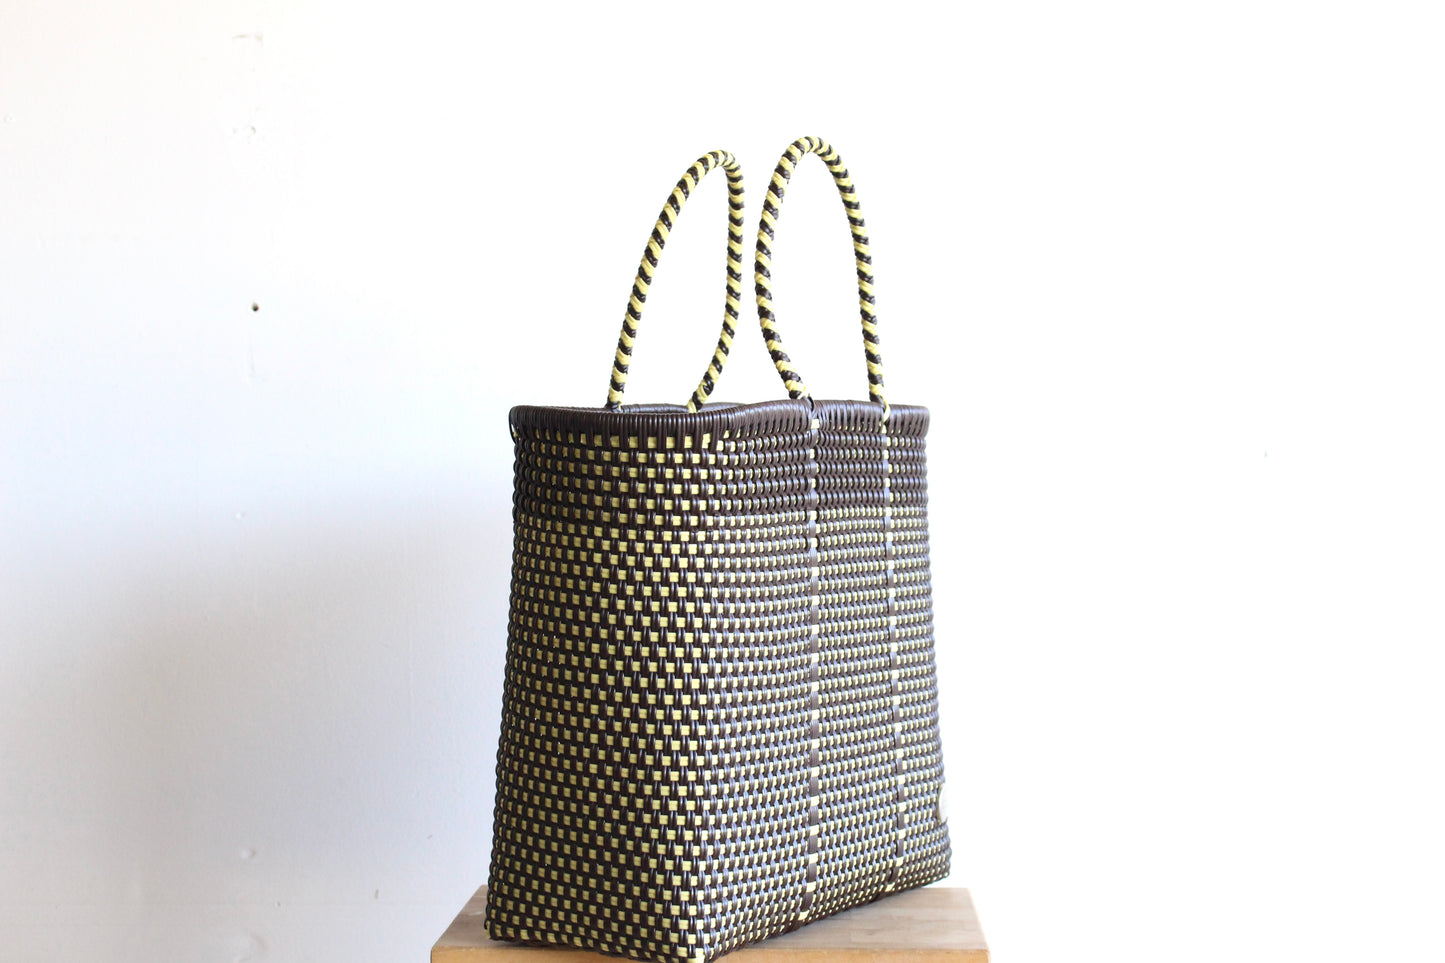 Brown & Vanilla Tote bag by MexiMexi